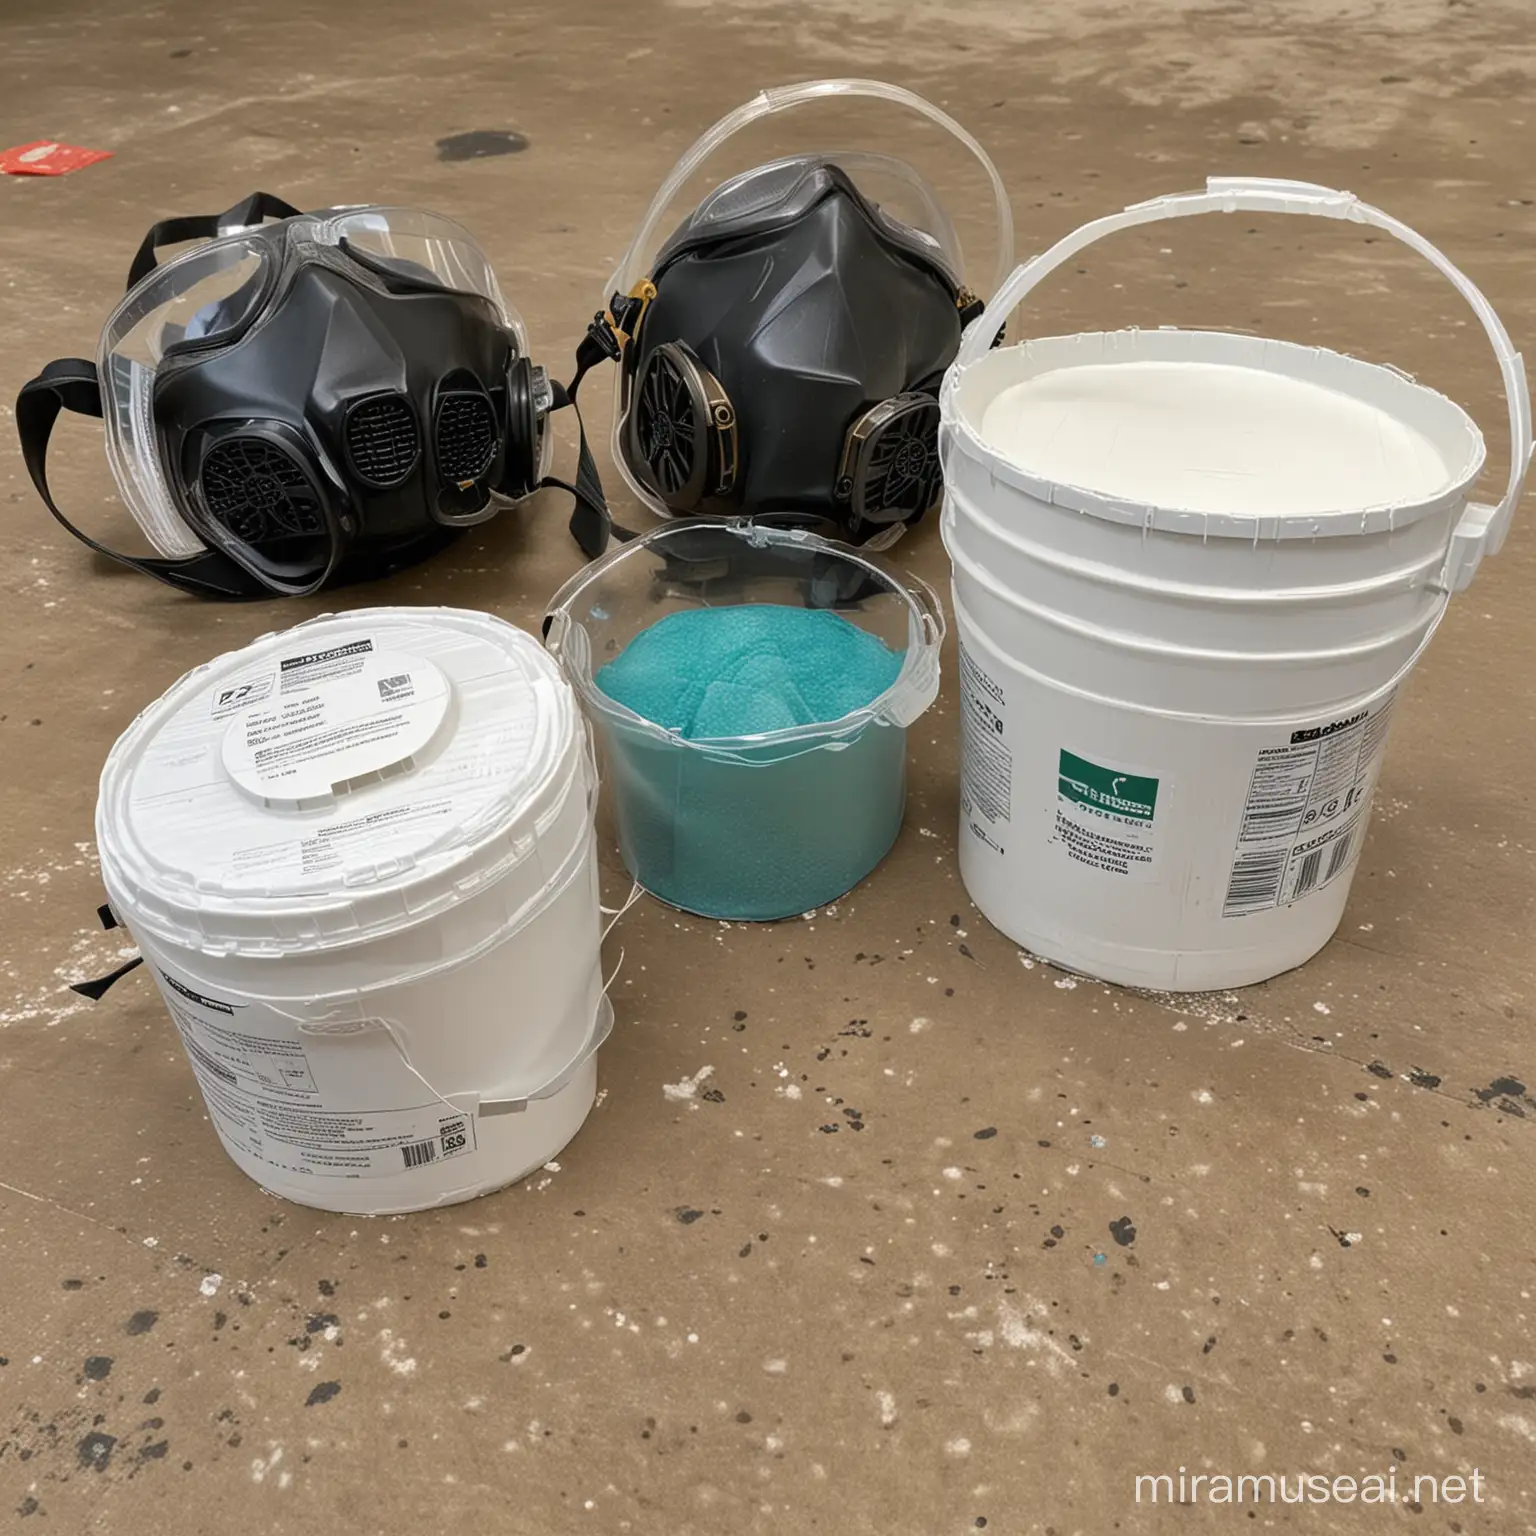 Respirator Masks by a Bucket of Resin Safety Precautions for Artistic Work